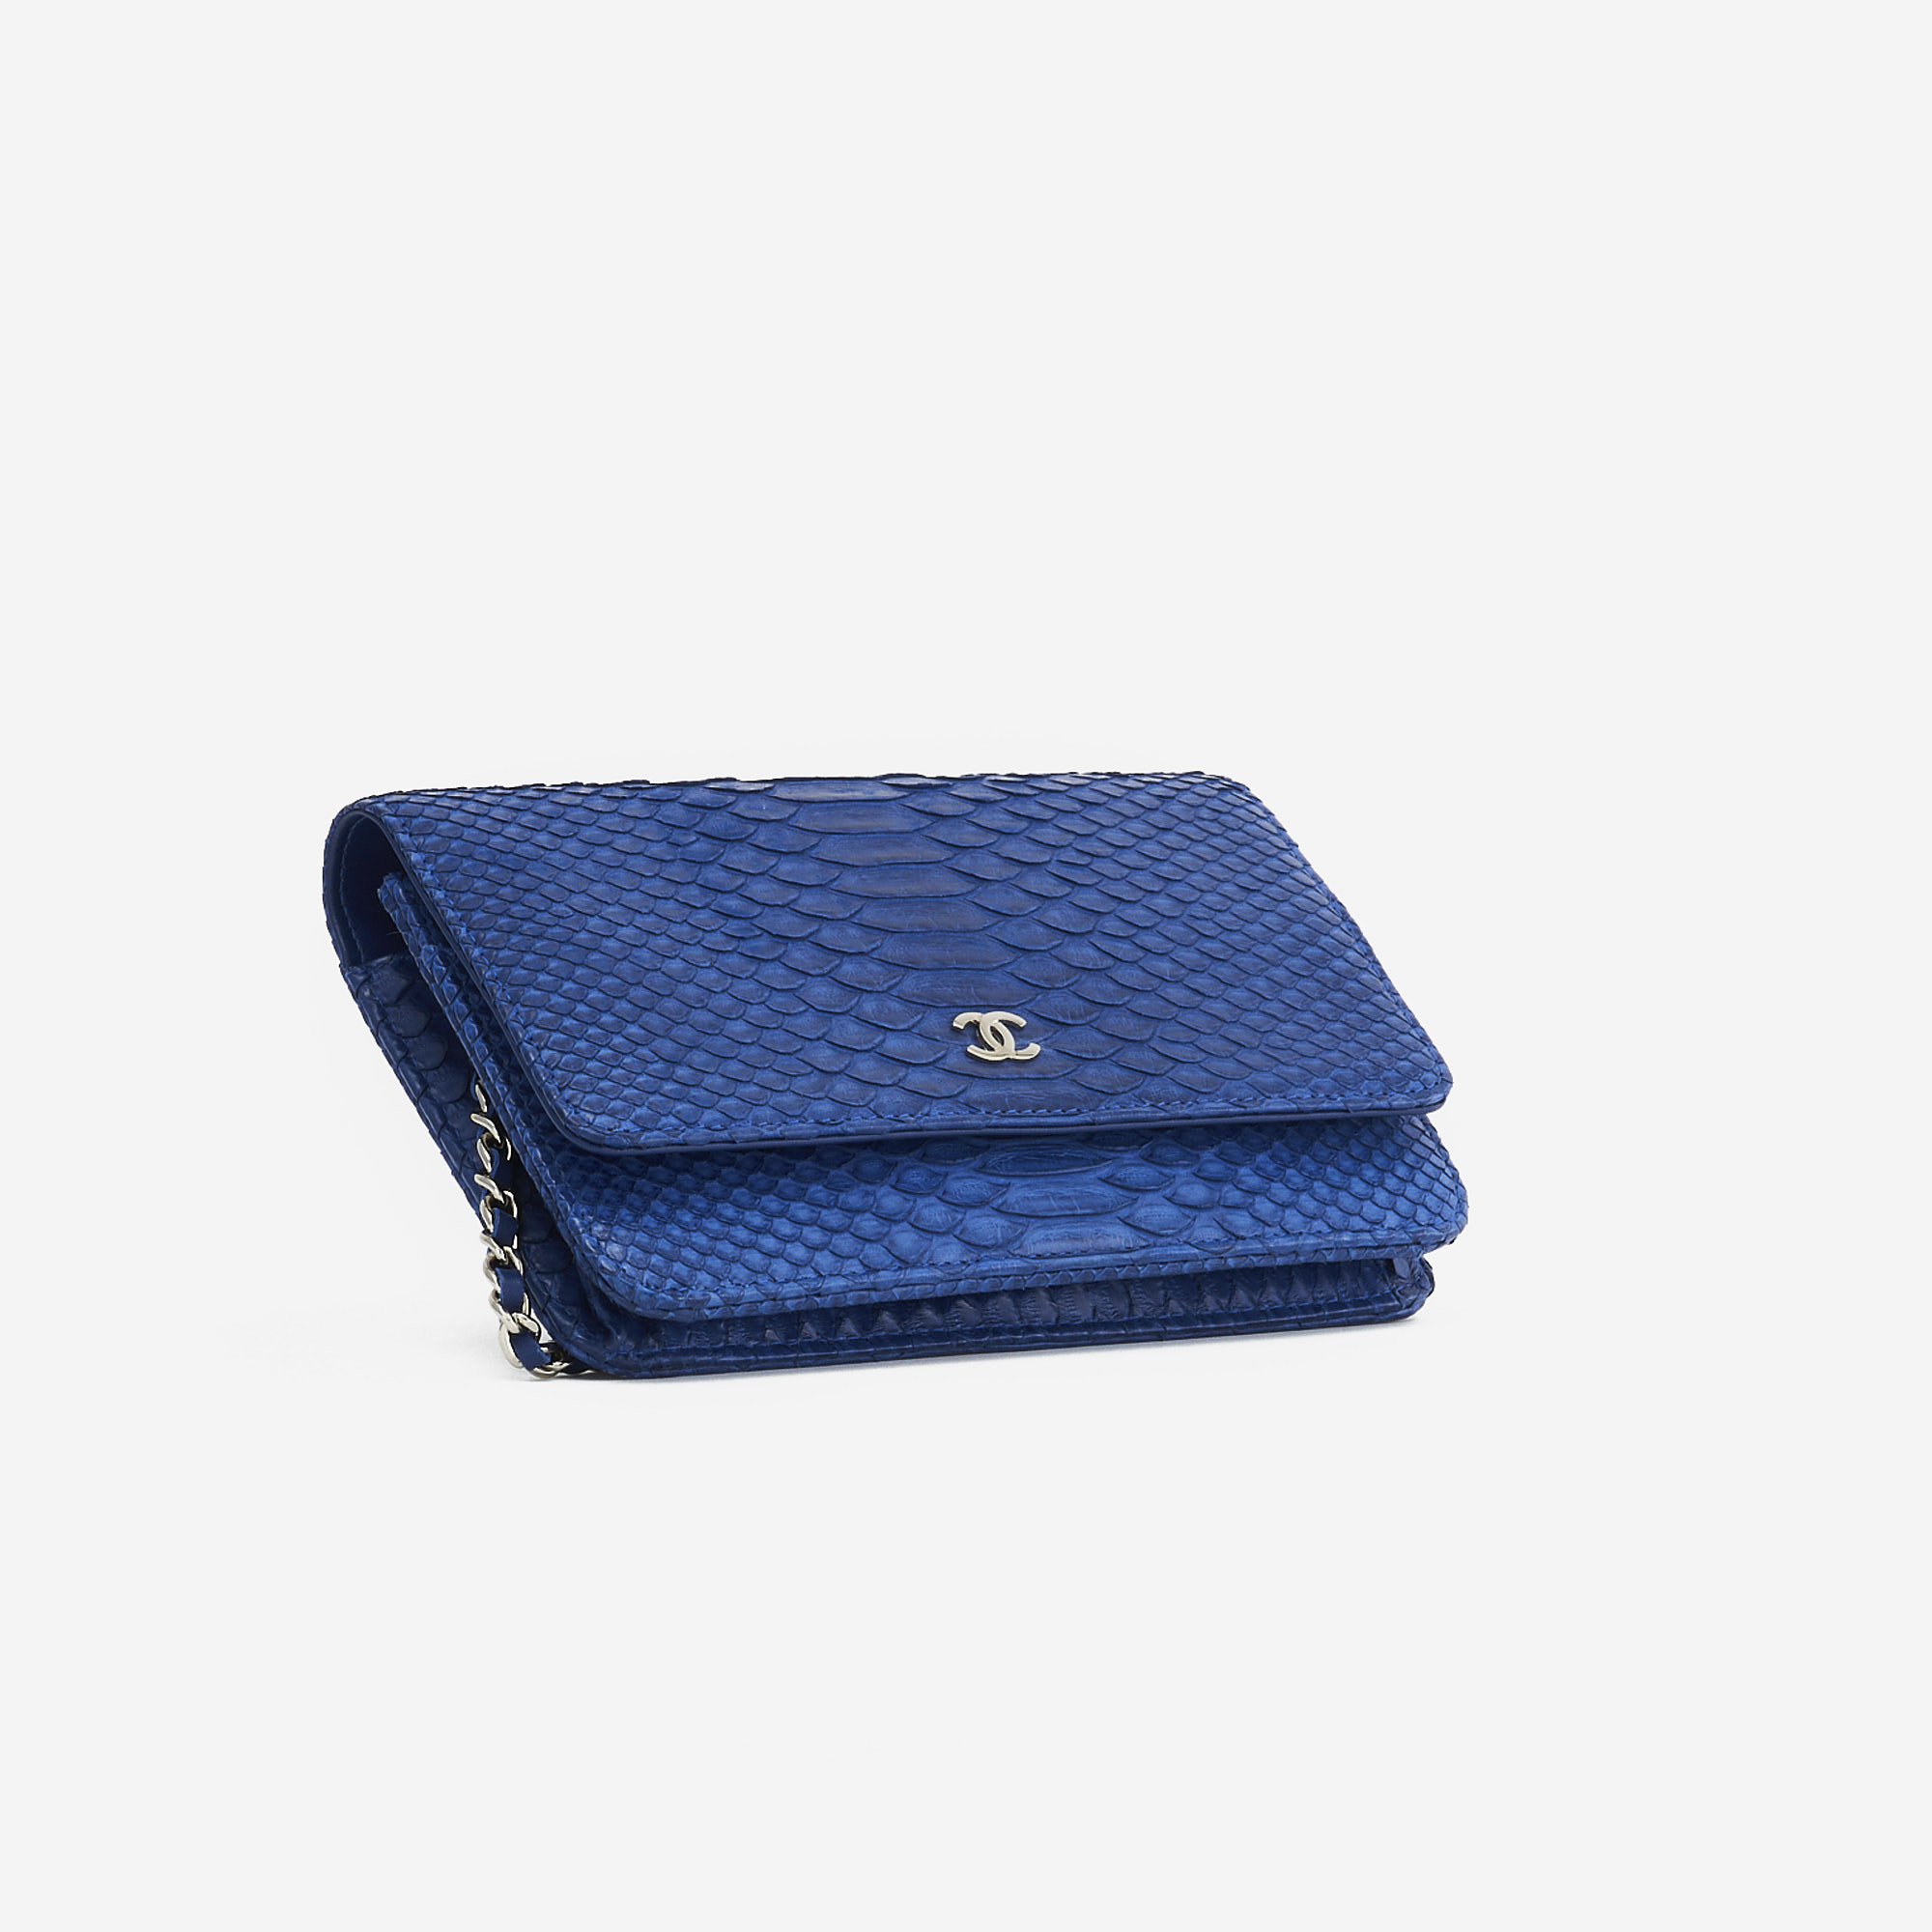 CHANEL Lambskin Quilted Mini Wallet On Chain WOC Neon Blue 801478   FASHIONPHILE